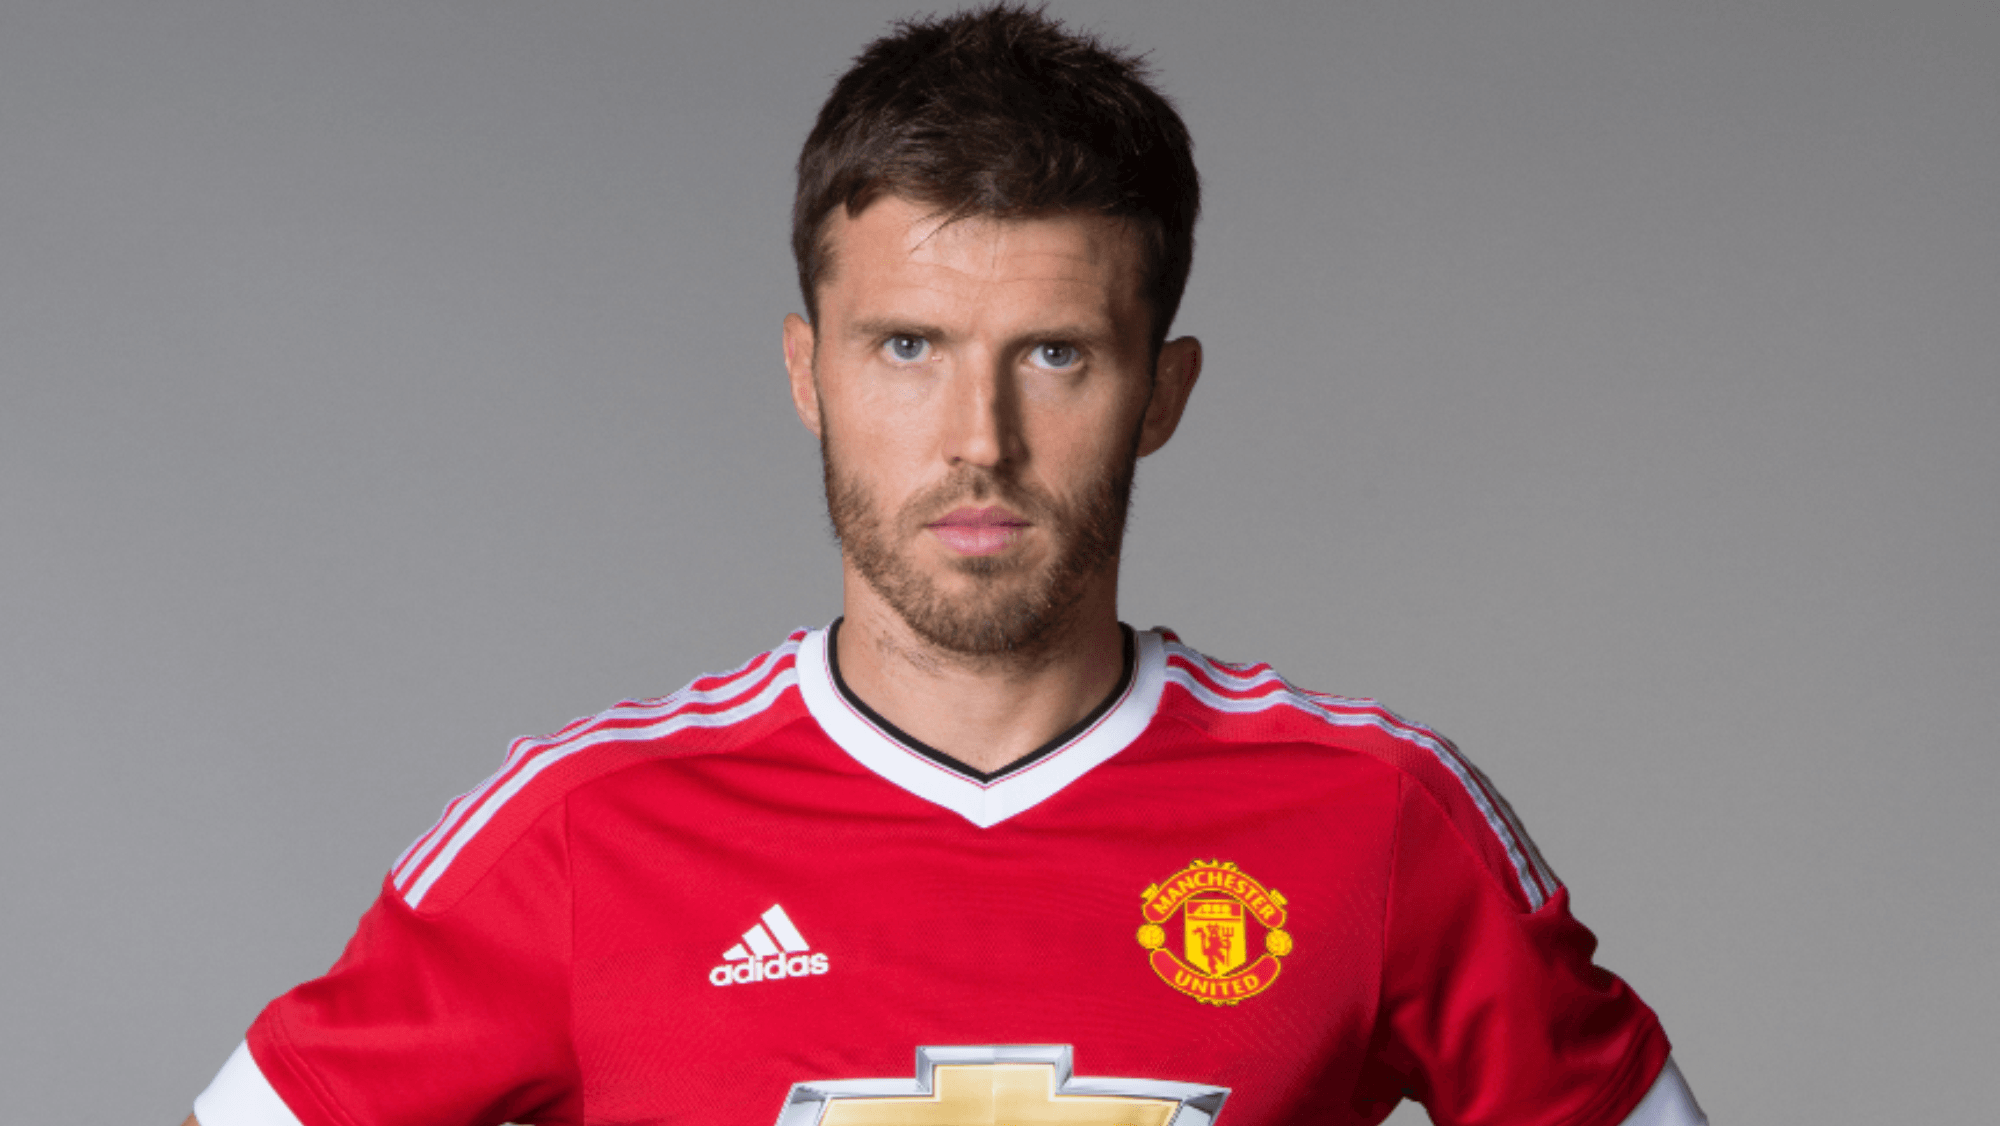 Carrick on United's plan for 2015/ his Reds career and playing